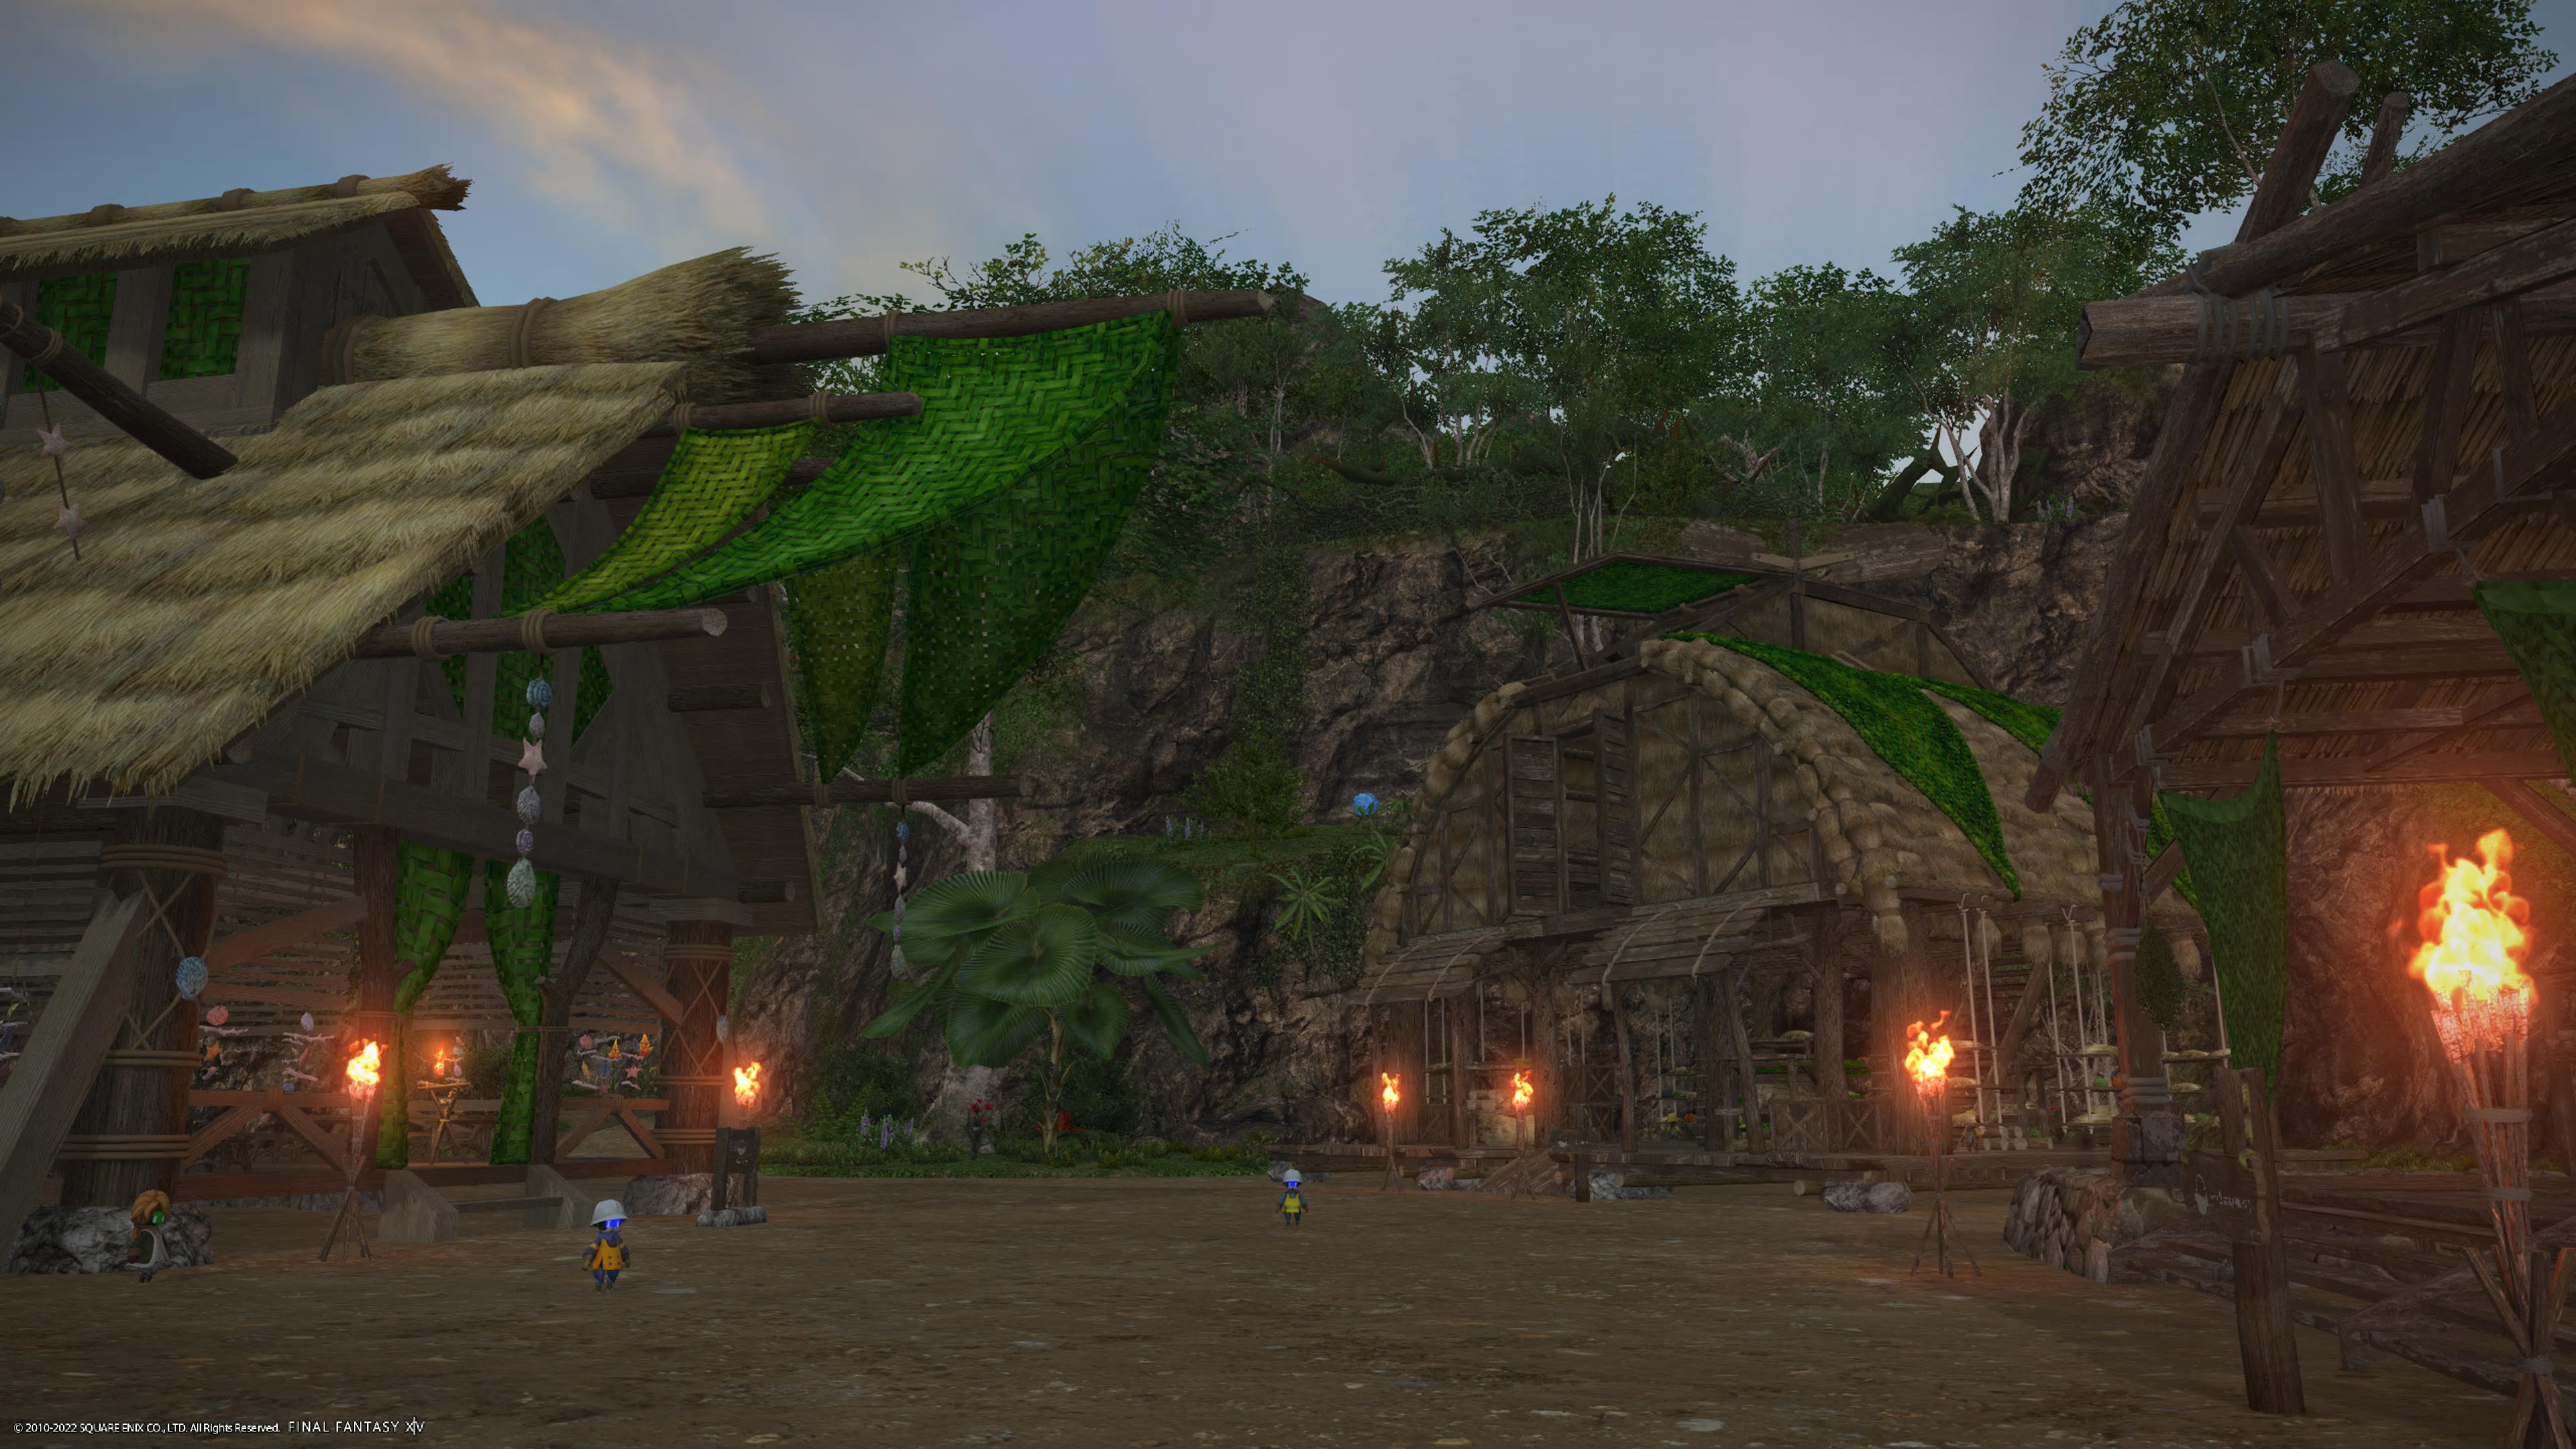 A nighttime view of a player's ranch on the Island Sanctuary in Final Fantasy XIV